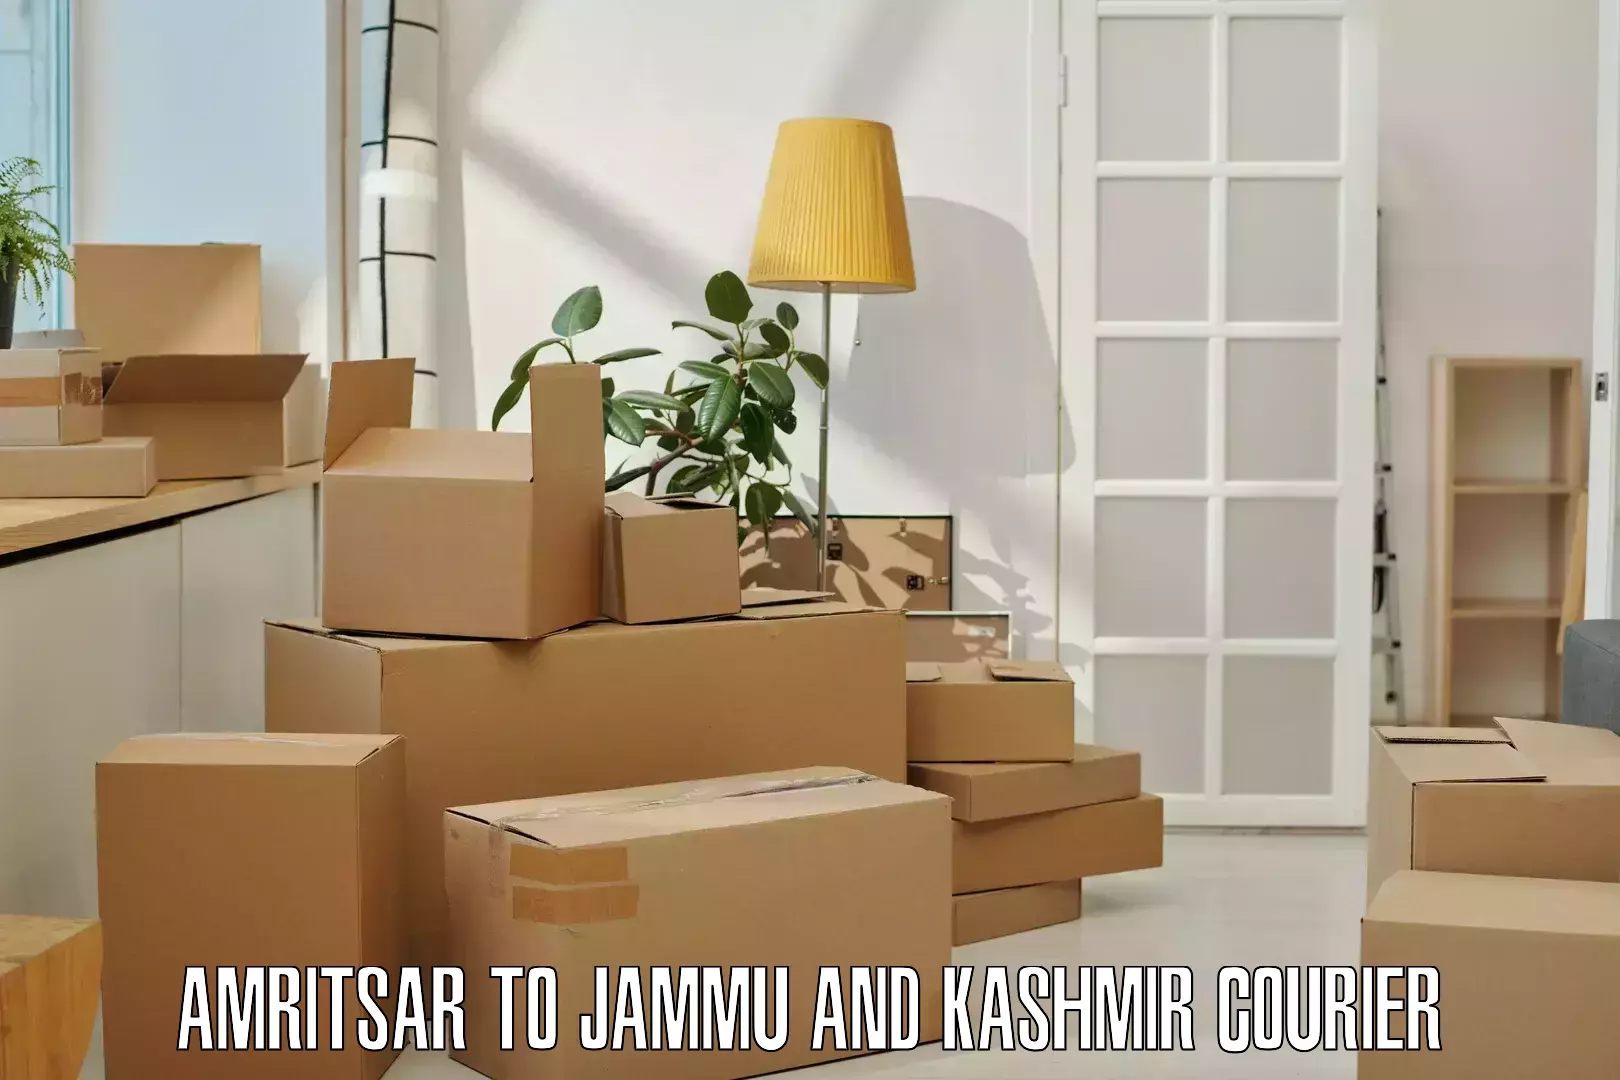 Scheduled delivery Amritsar to University of Jammu